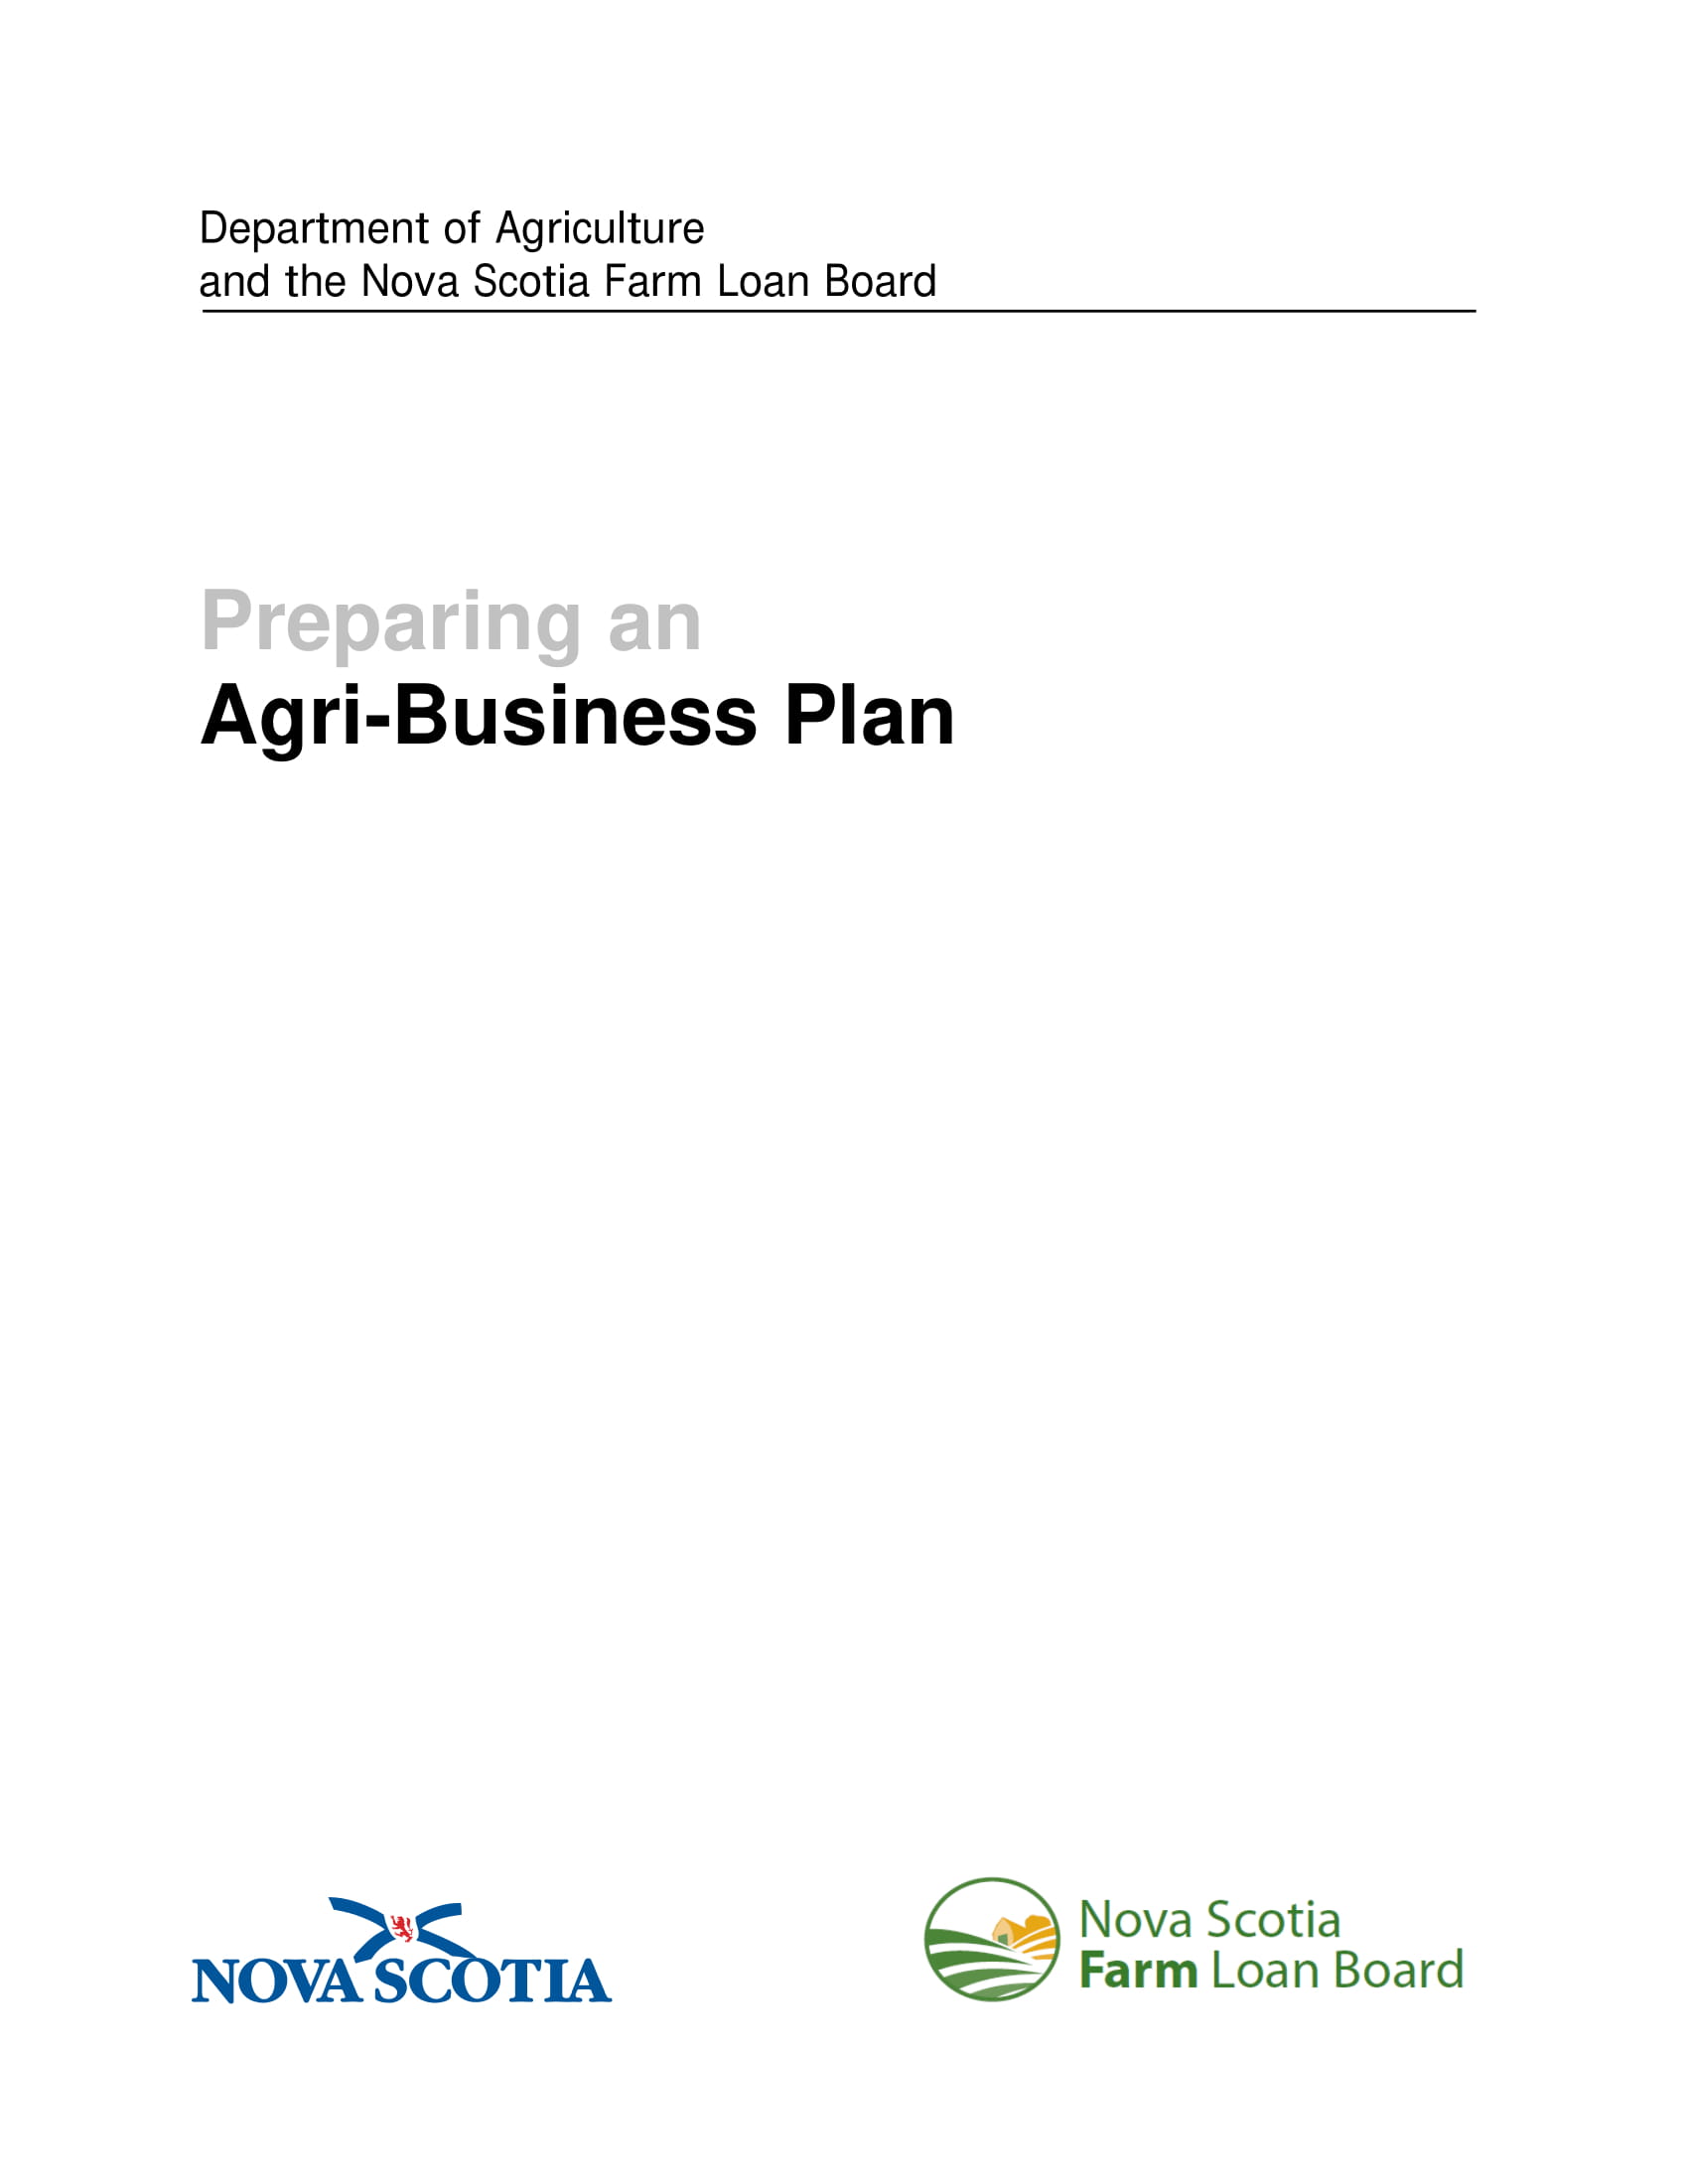 agri business plan for a farm example 01